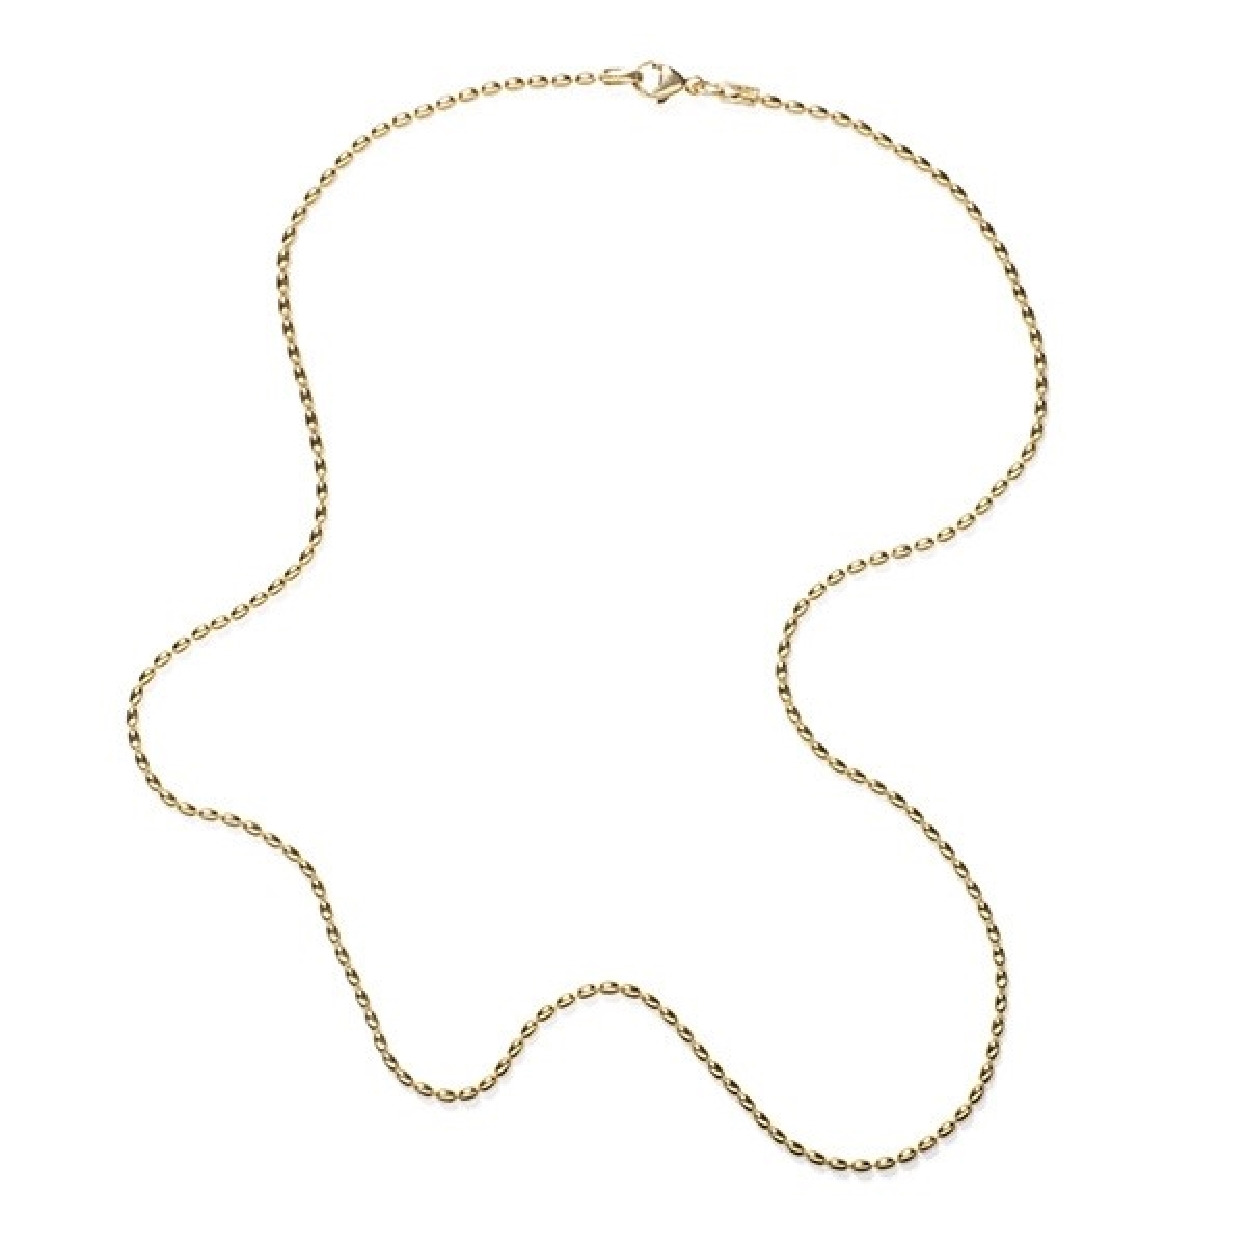 Southern Gates Rice Bead Chain 1.8mm 14Kt Gold Filled 16 Inches